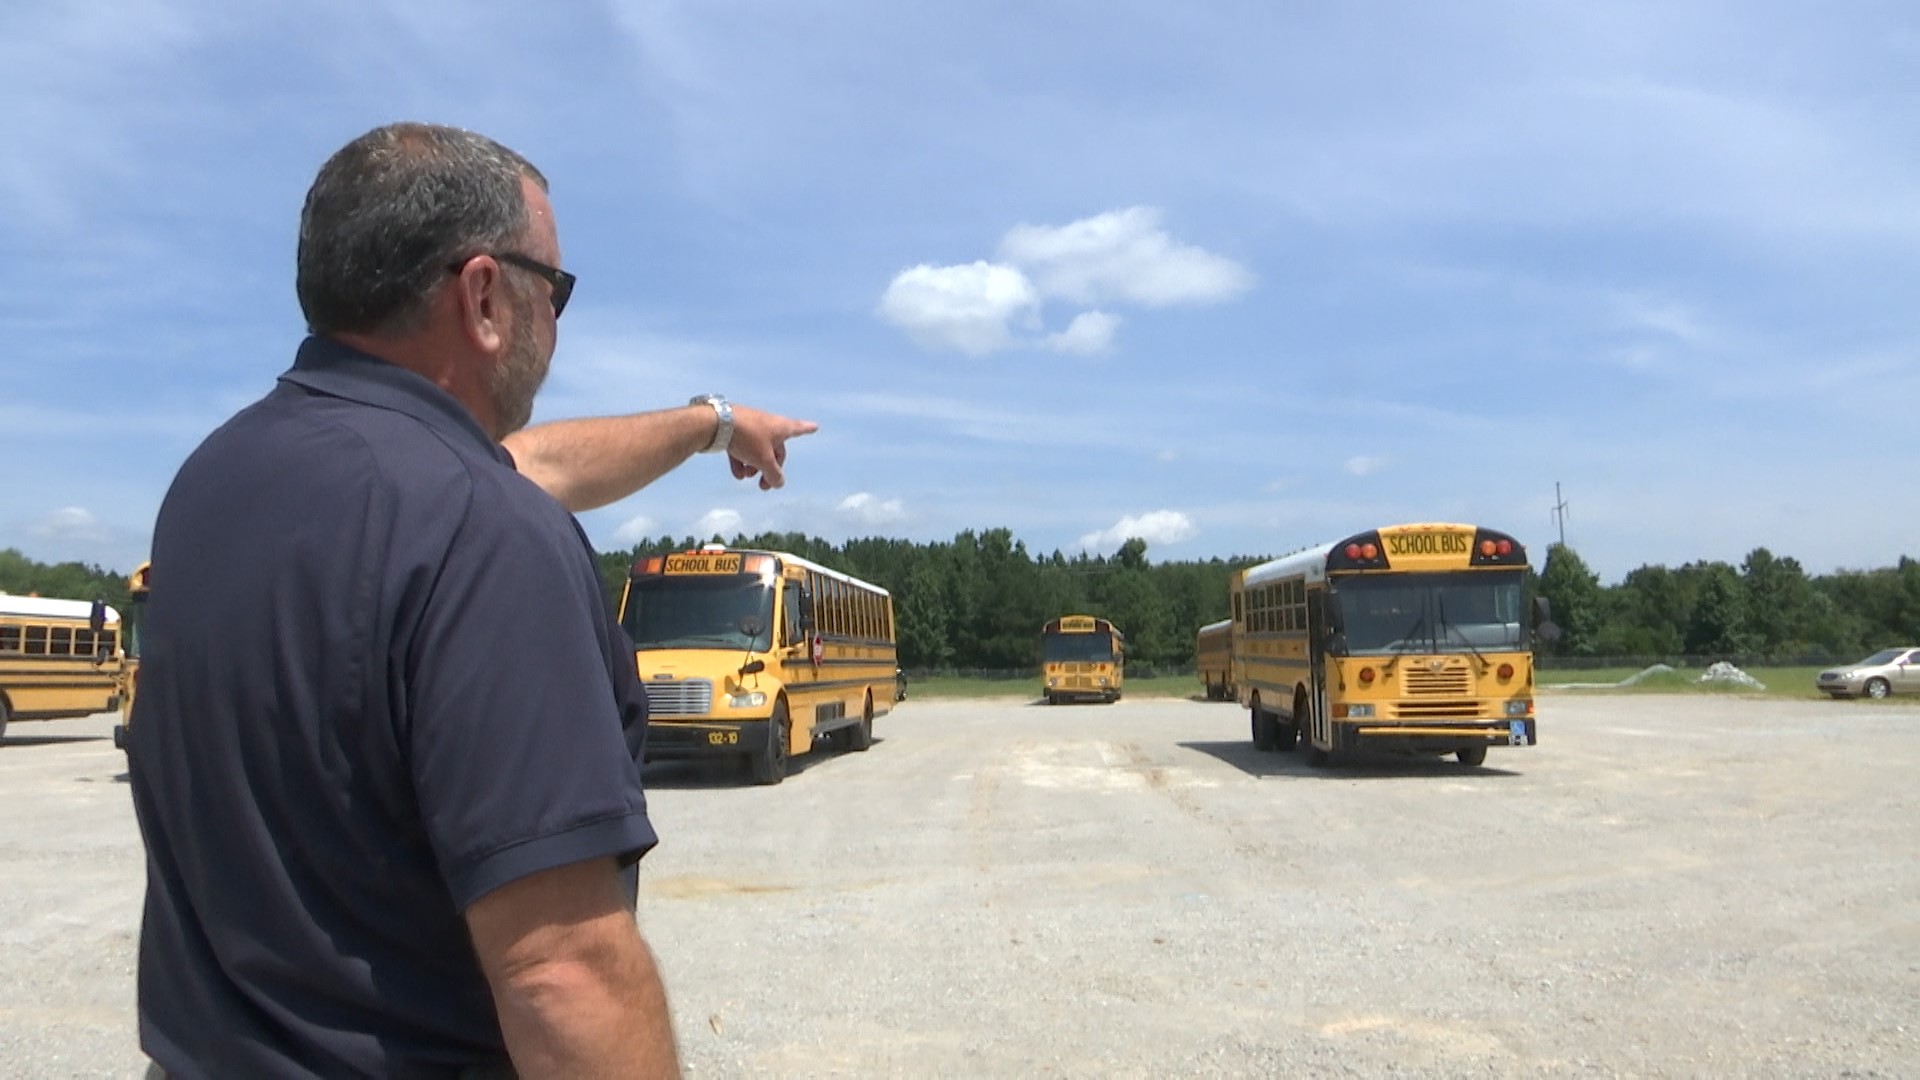 Some parents are worried as their children ride school buses with no air conditioning during a heat advisory.